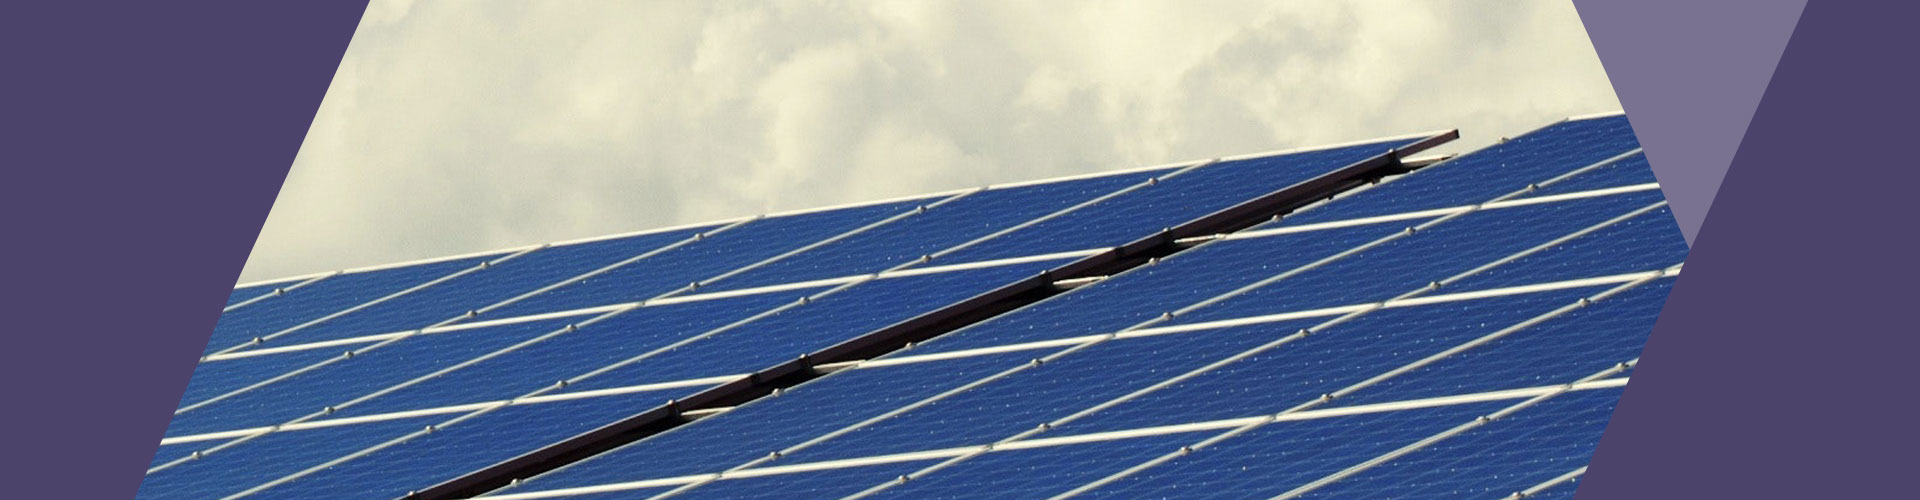 solar-rebates-for-small-businesses-announced-business-victoria